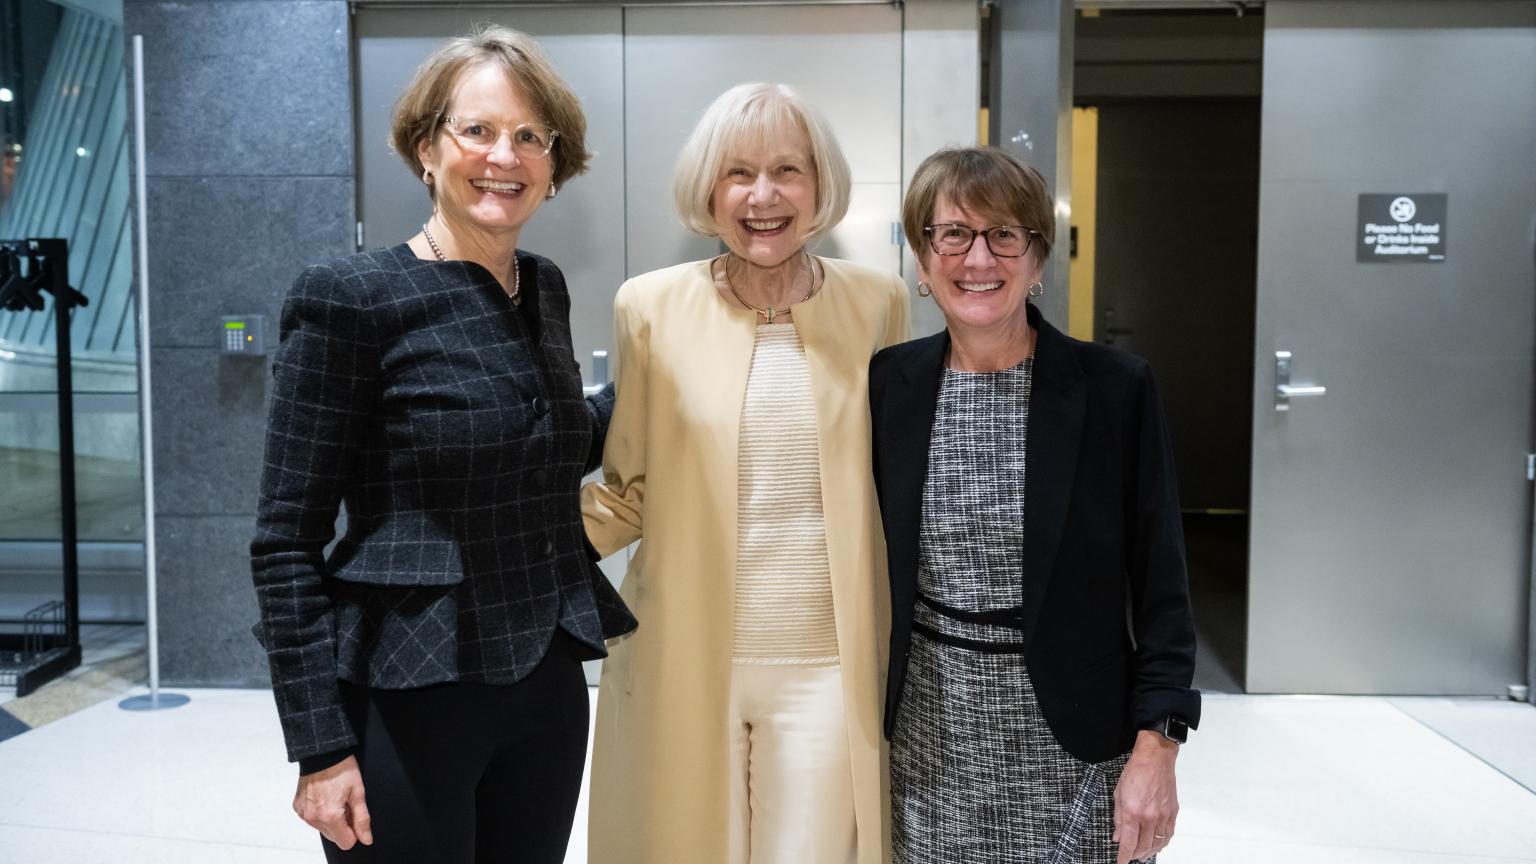 Photo of Provost Laurie McCauley, Dr. Eva Feldman and Dr. Donna Martin